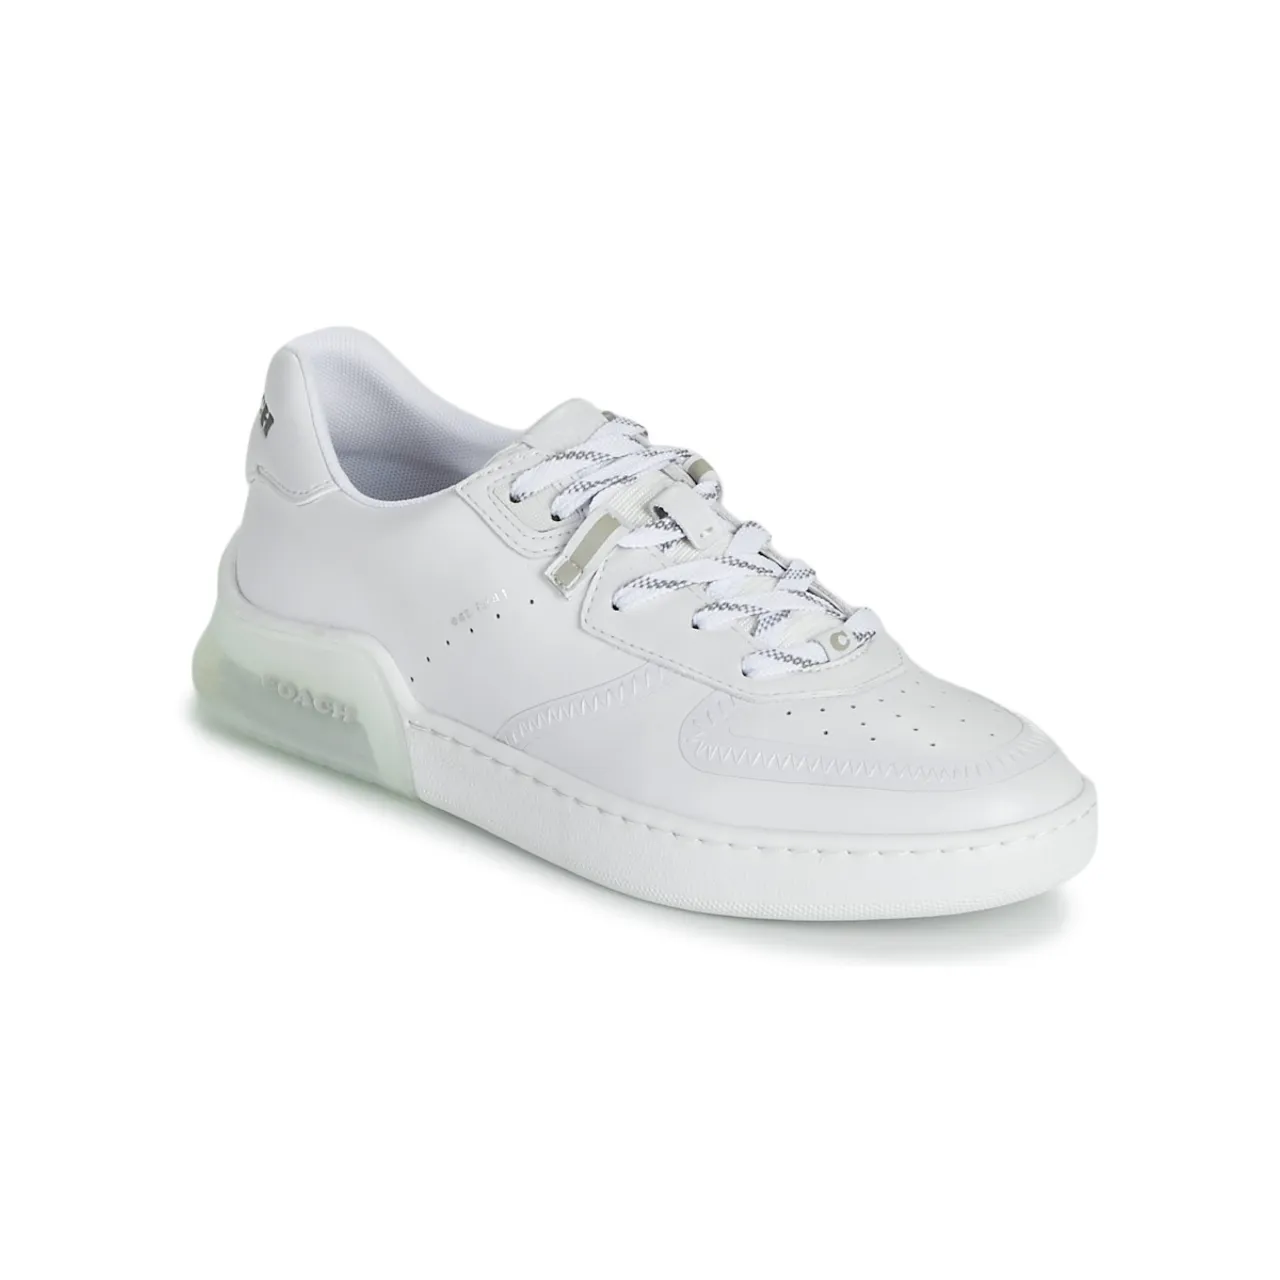 Coach  CITYSOLE  women's Shoes (Trainers) in White